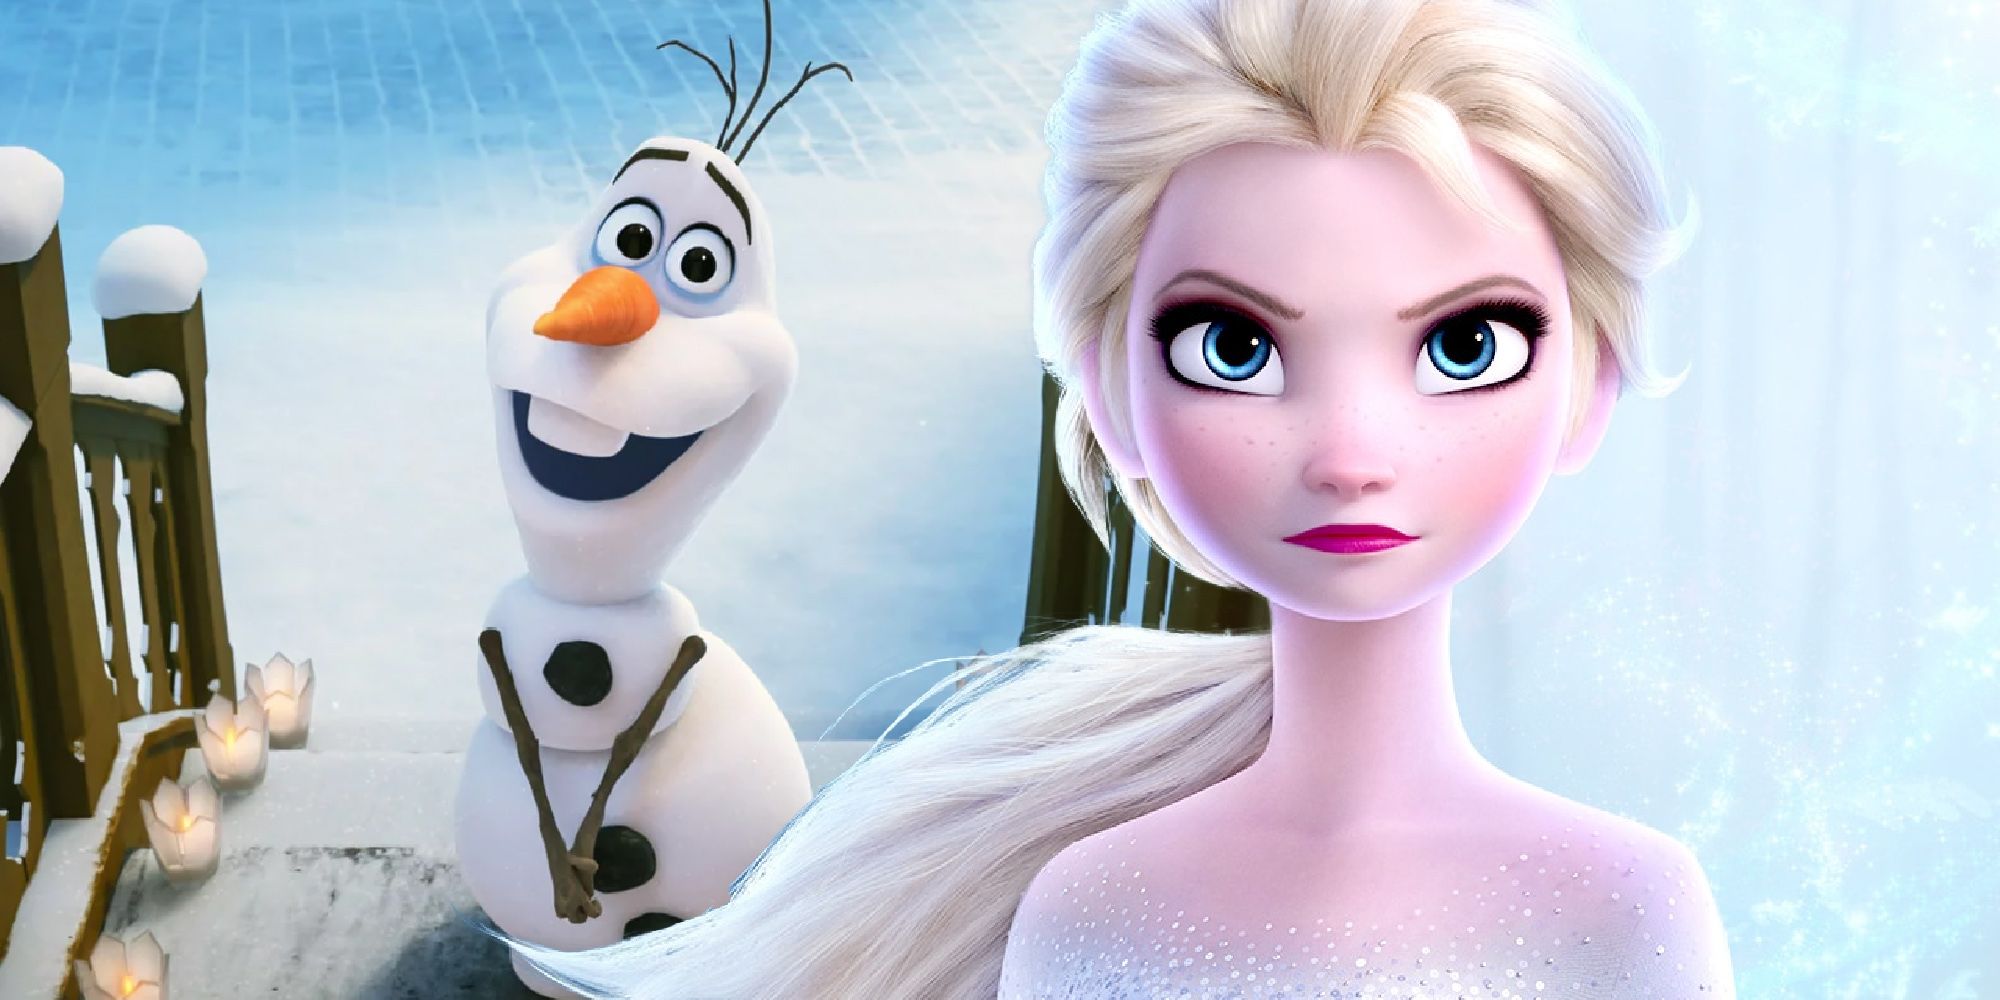 A blended image features Olaf and Elsa